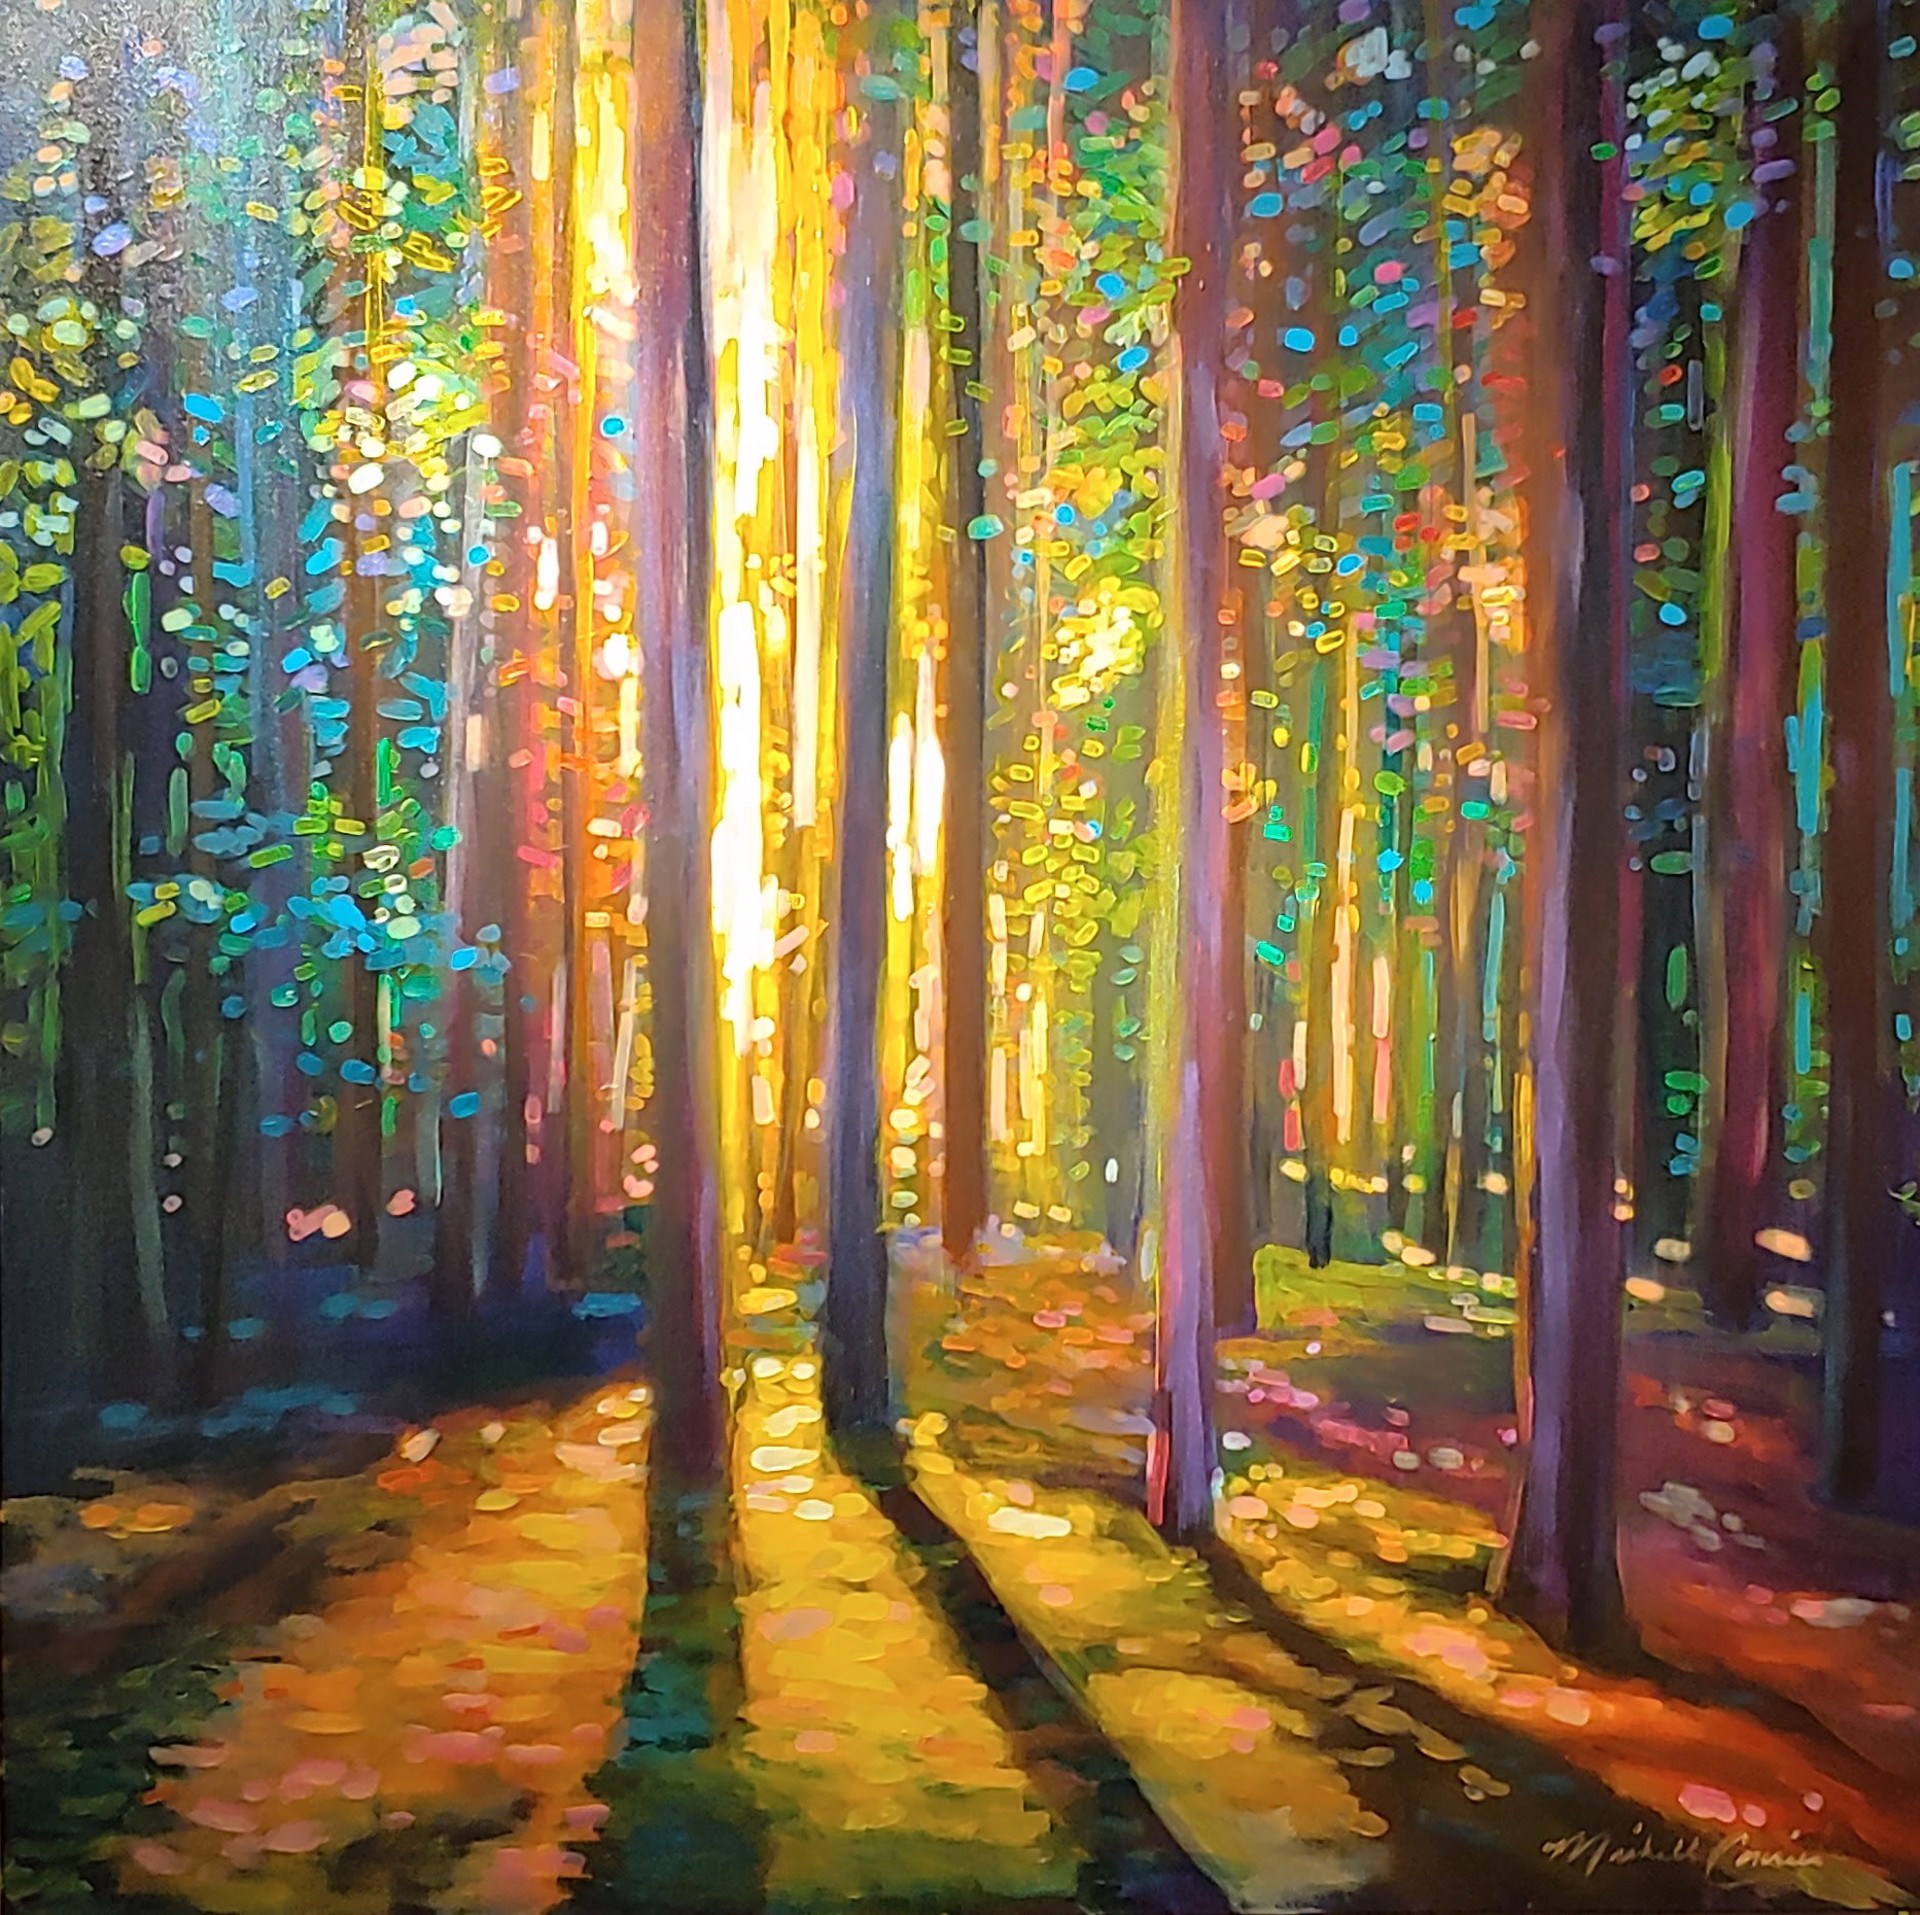 Sheltered Woods by Michelle Courier